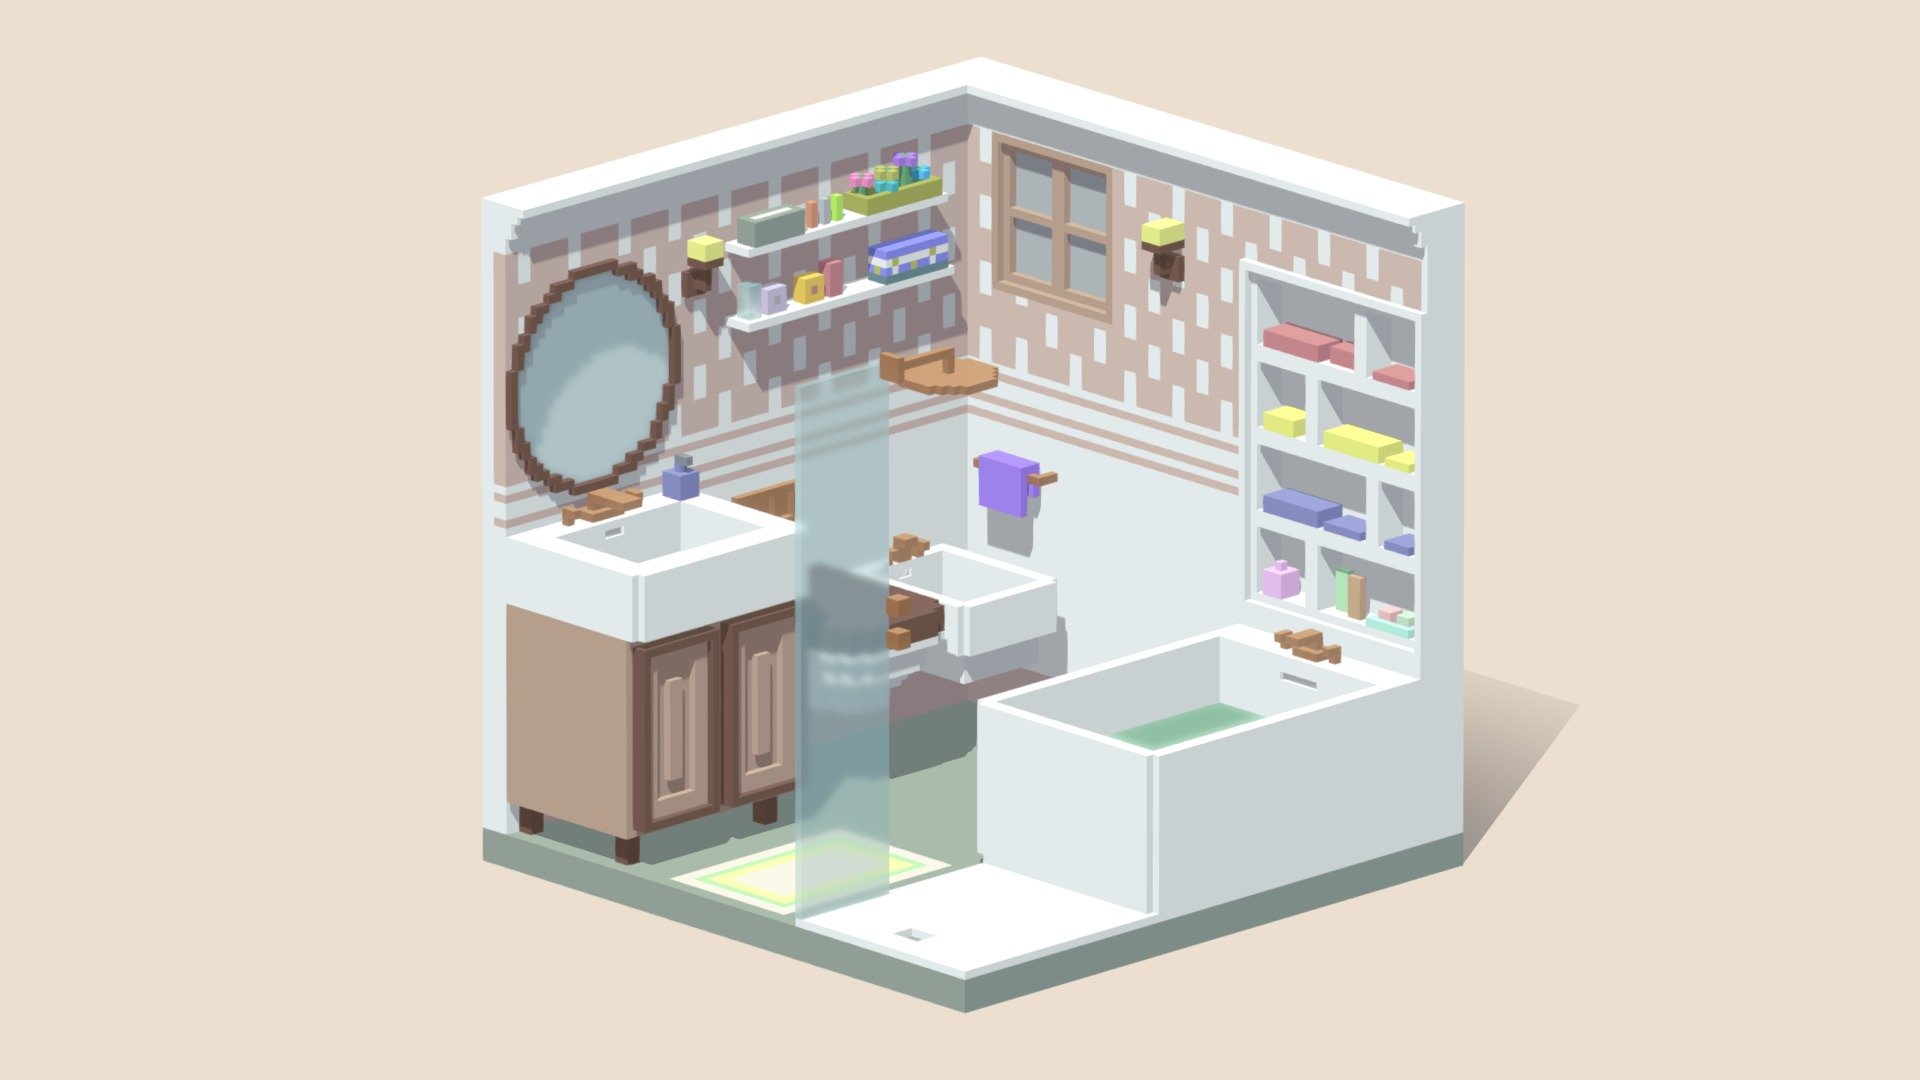 Bathroom of an old house with some objects of today made in Magicavoxel. Hope you like it!

Warning: the model may not be seen here in the same way that it is seen in Magicavoxel - Isometric Bathroom Voxel - Buy Royalty Free 3D model by Sora (@dualityart) 3d model